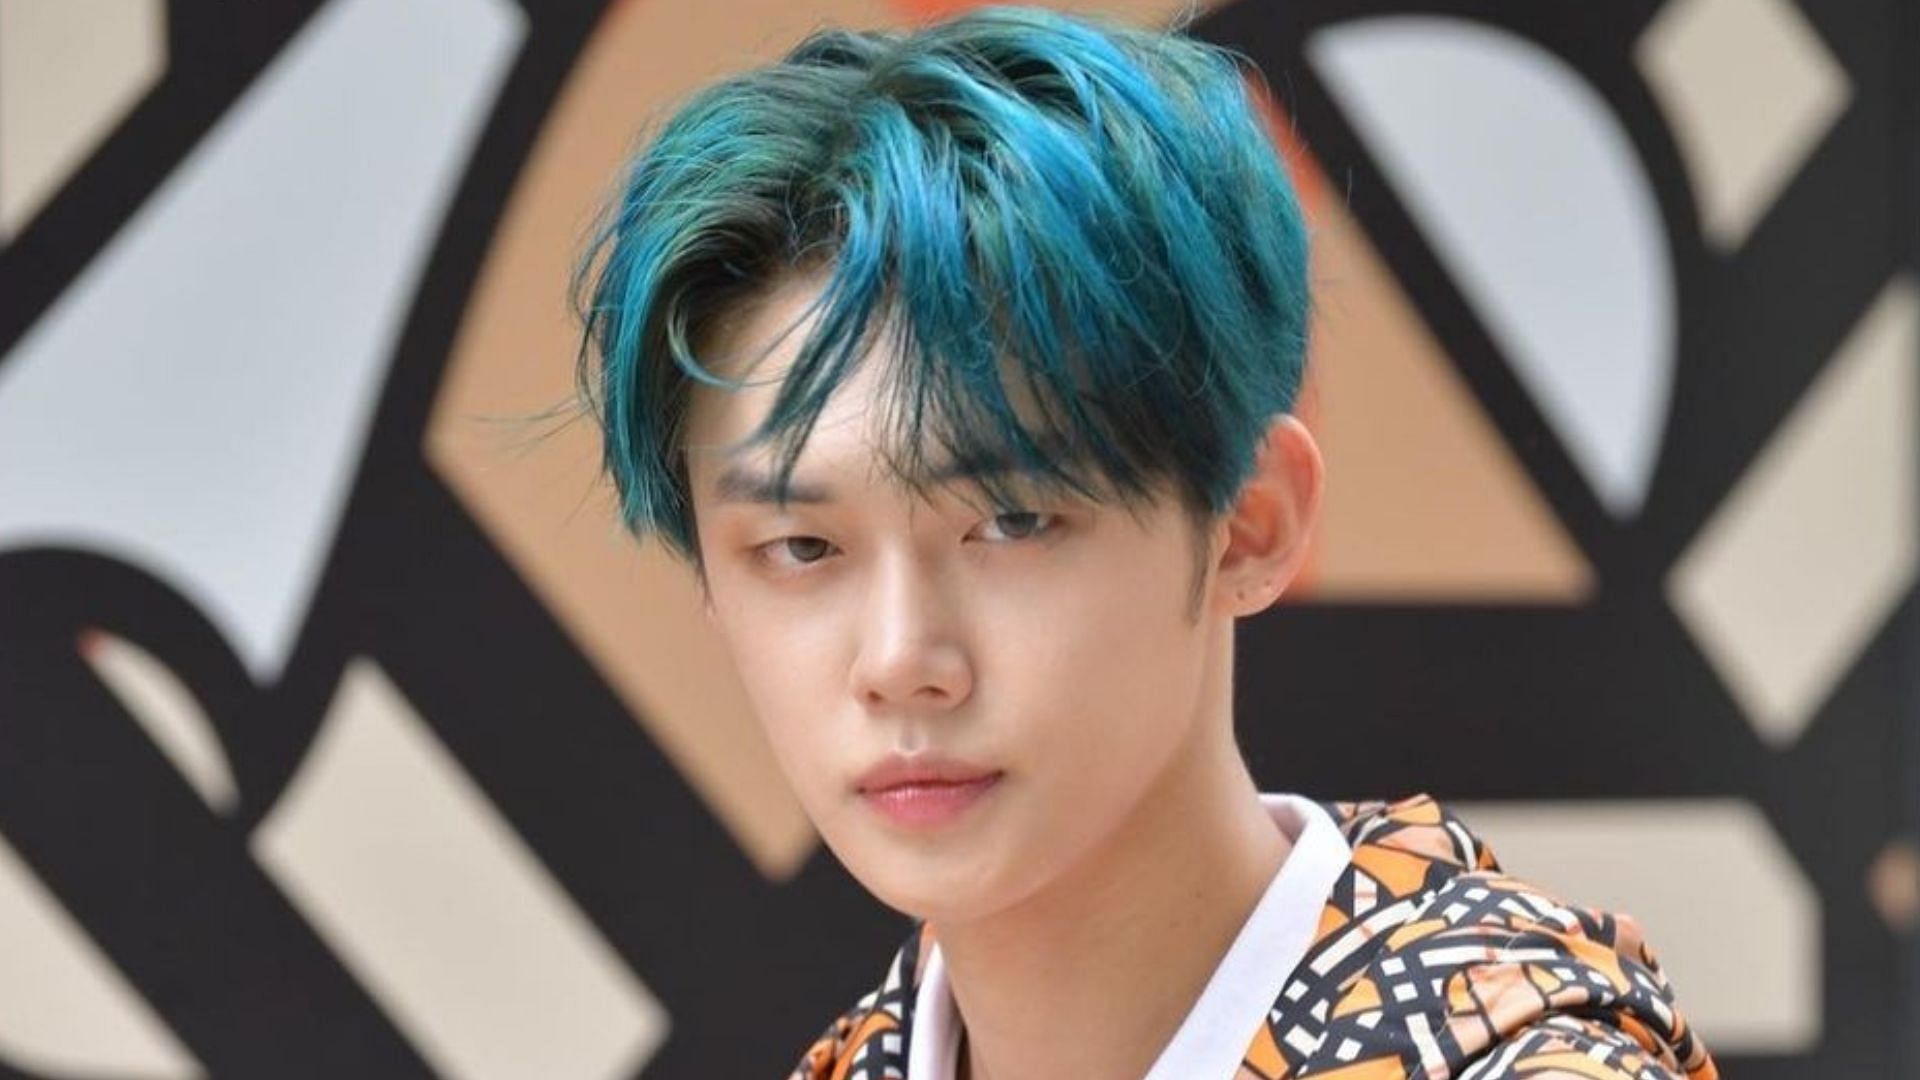 8. "Cobalt Blue Hair for Men: Pros and Cons to Consider" - wide 5